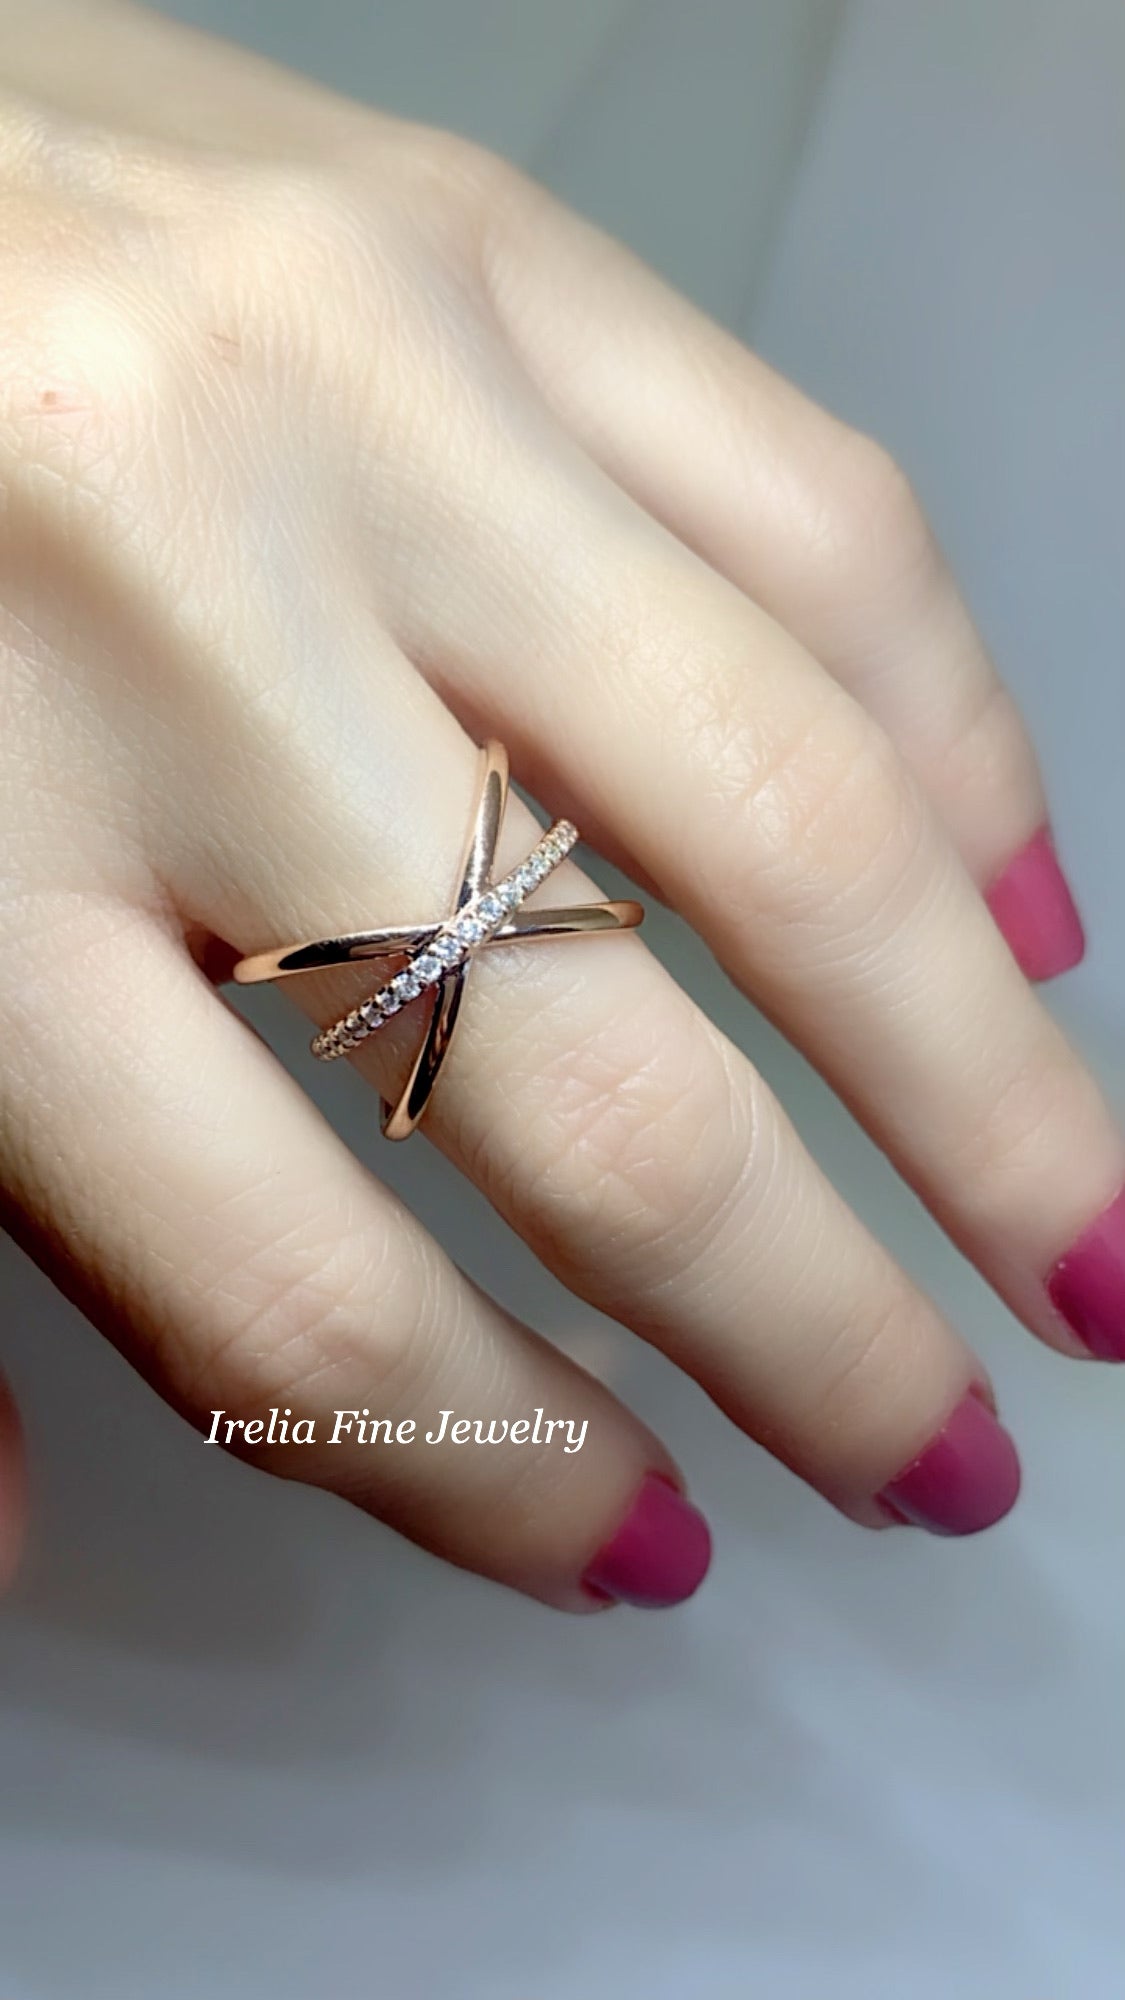 14K Rose Gold with 1/6 CTW Natural Diamond Ring with Criss-Cross Design